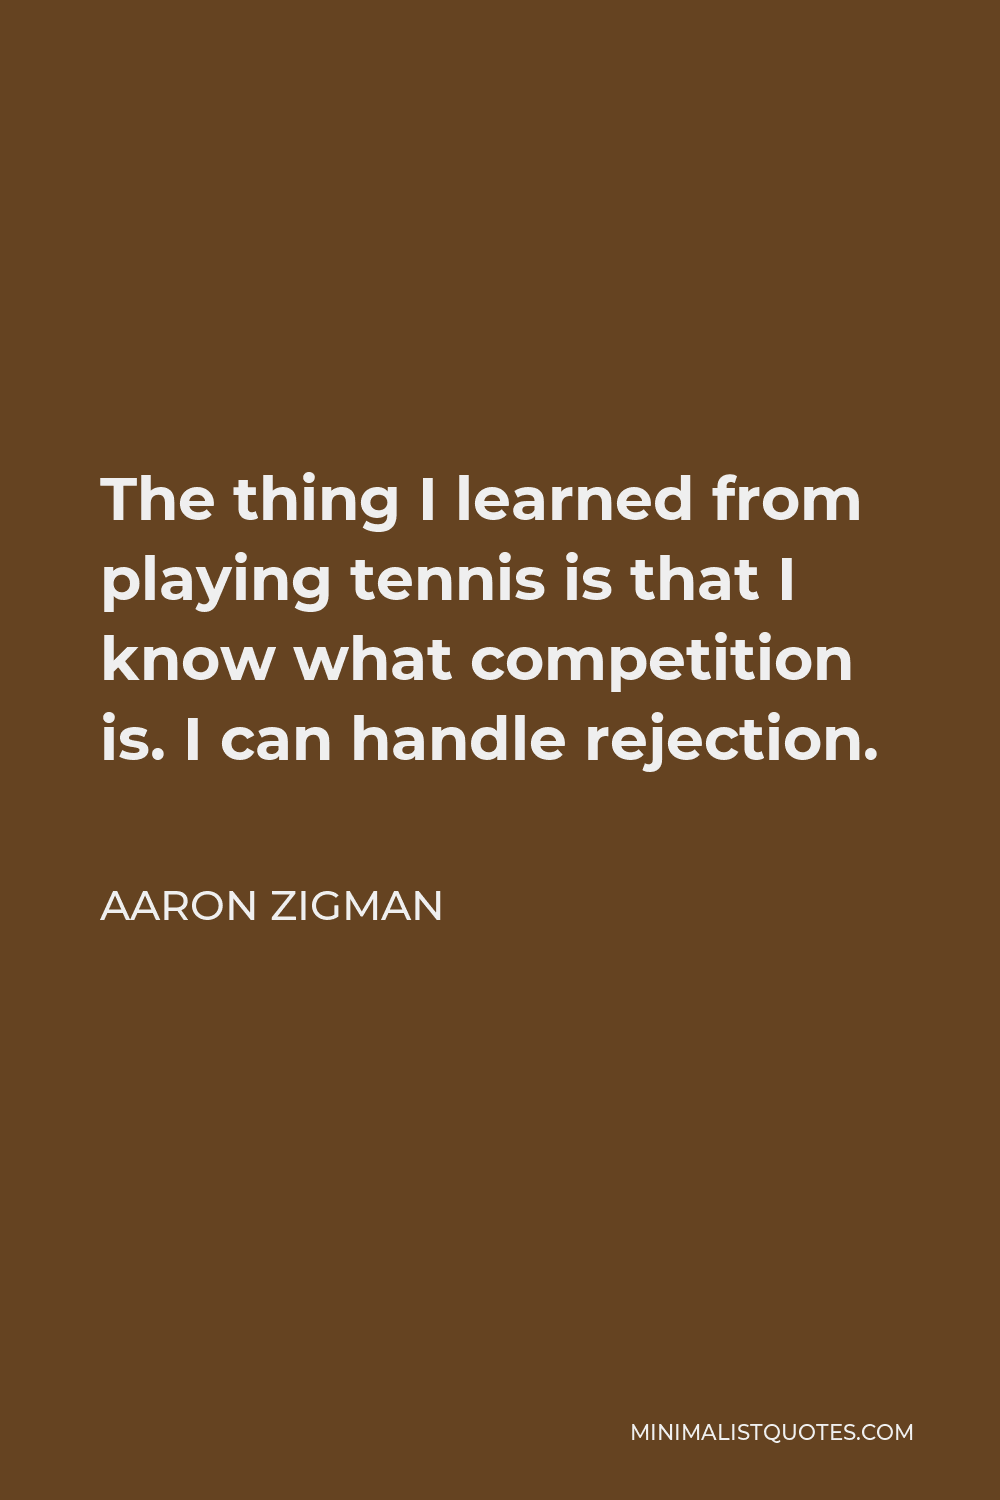 Aaron Zigman Quote - The thing I learned from playing tennis is that I know what competition is. I can handle rejection.